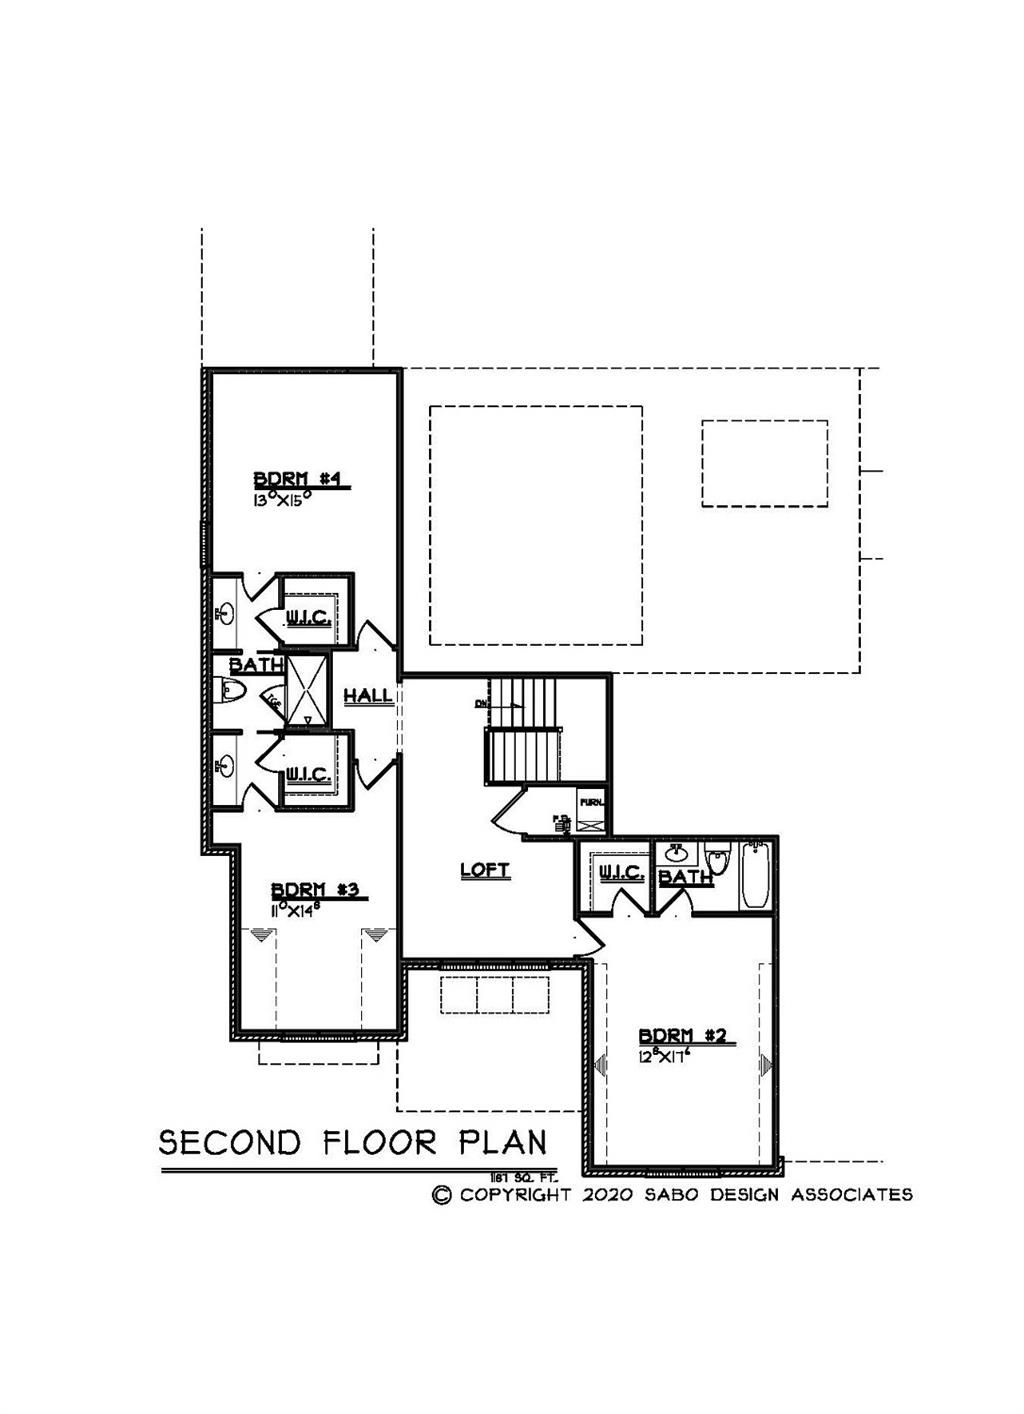 Floor Plan 2 for 9218 Stonewood Court Symmes Twp., OH 45242